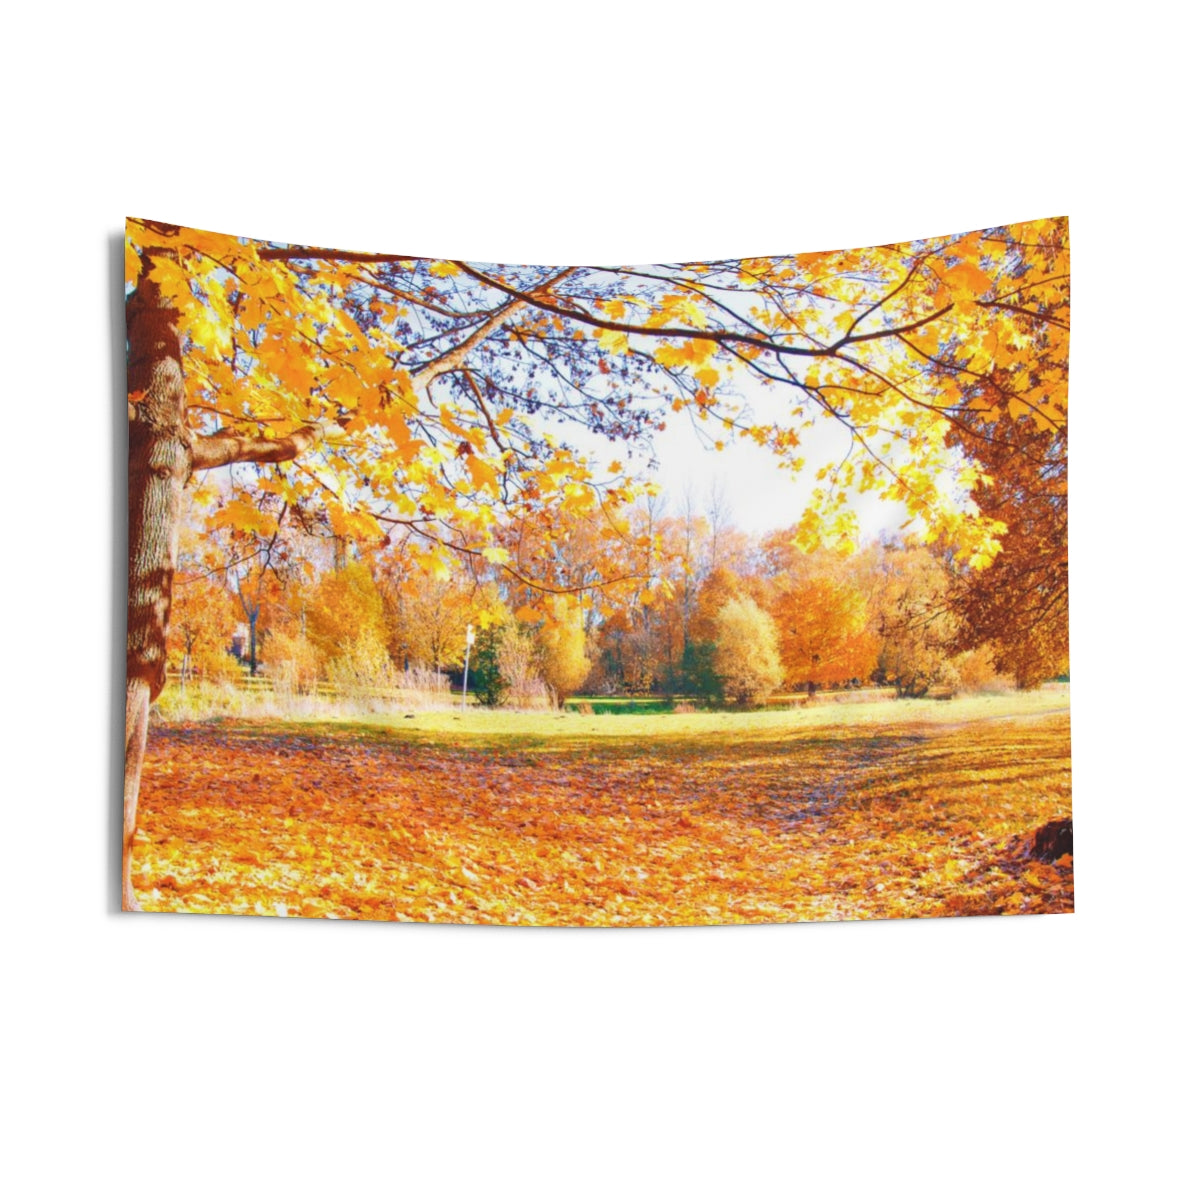 Fall Leaves Tapestry, Autumn Foliage Trees Nature Landscape Wall Aesthetic Art Hanging Large Small Decor College Dorm Room Starcove Fashion